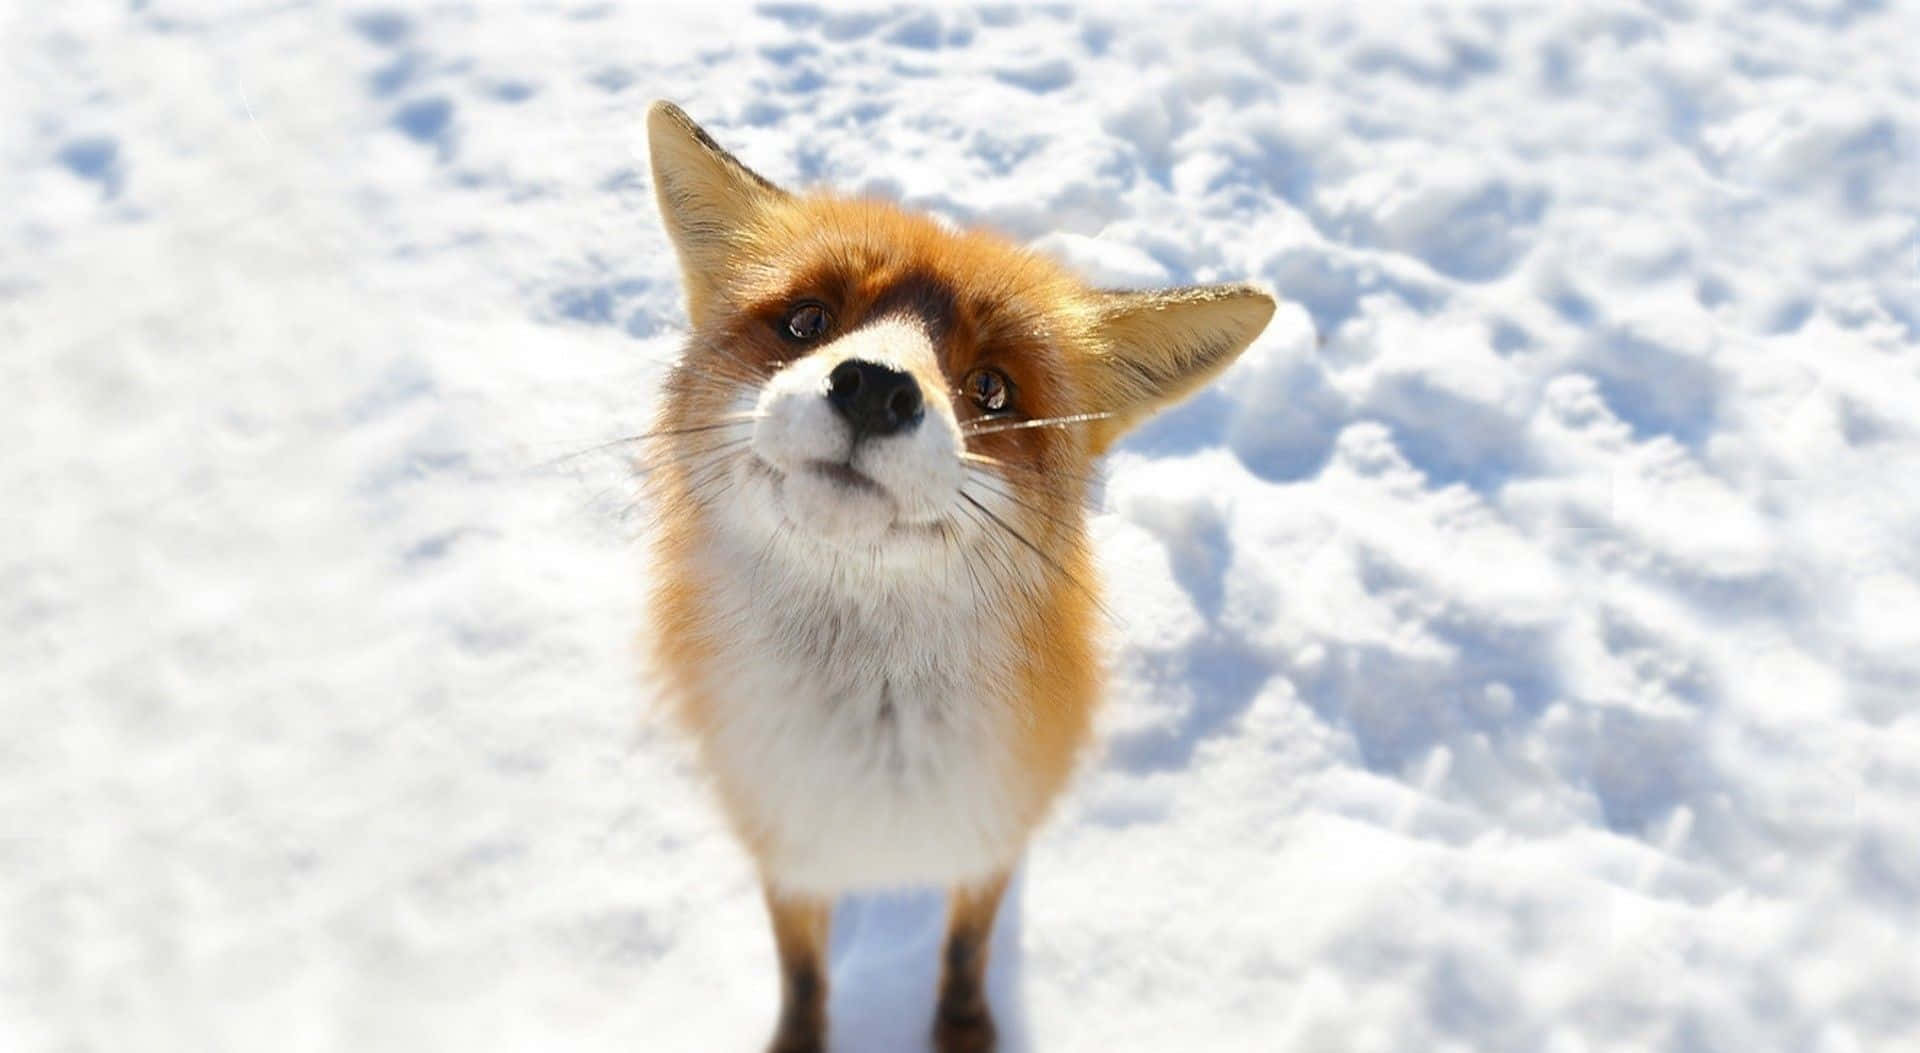 "A beautiful red fox smiles, bringing nature's beauty to life."